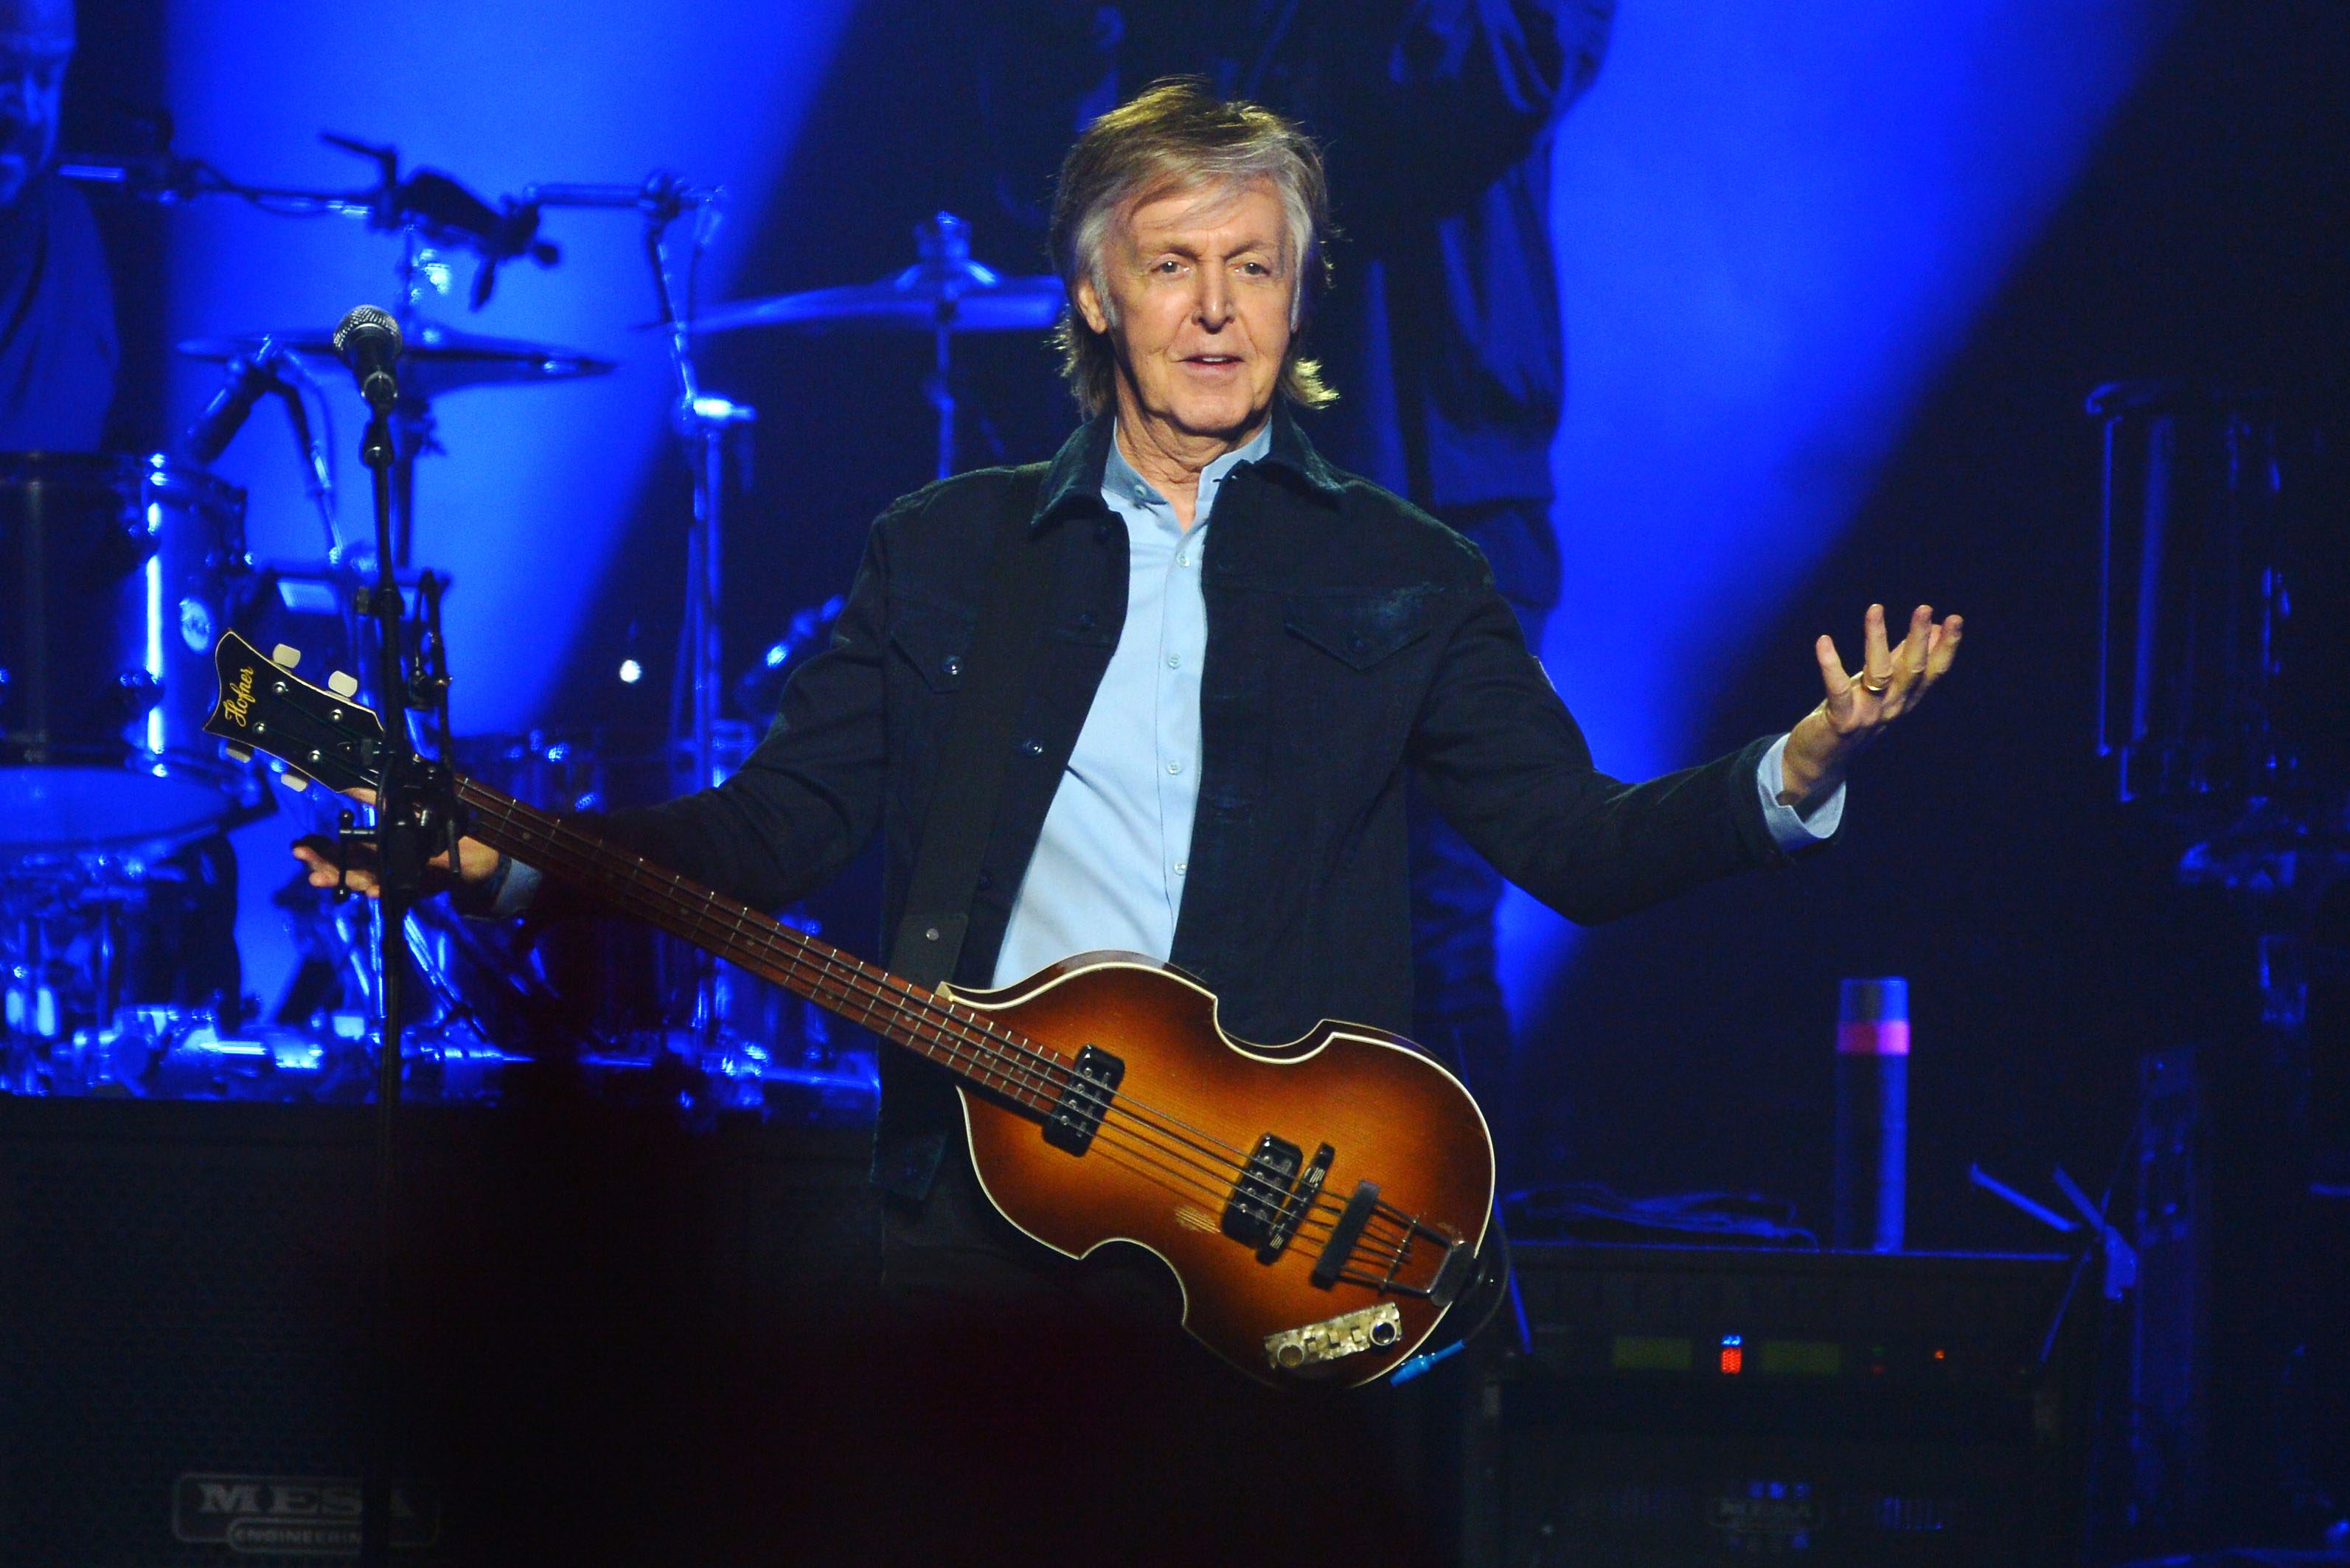 Sir Paul McCartney performs live on stage at the O2 Arena during his 'Freshen Up' tour, on December 16, 2018 in London, England.